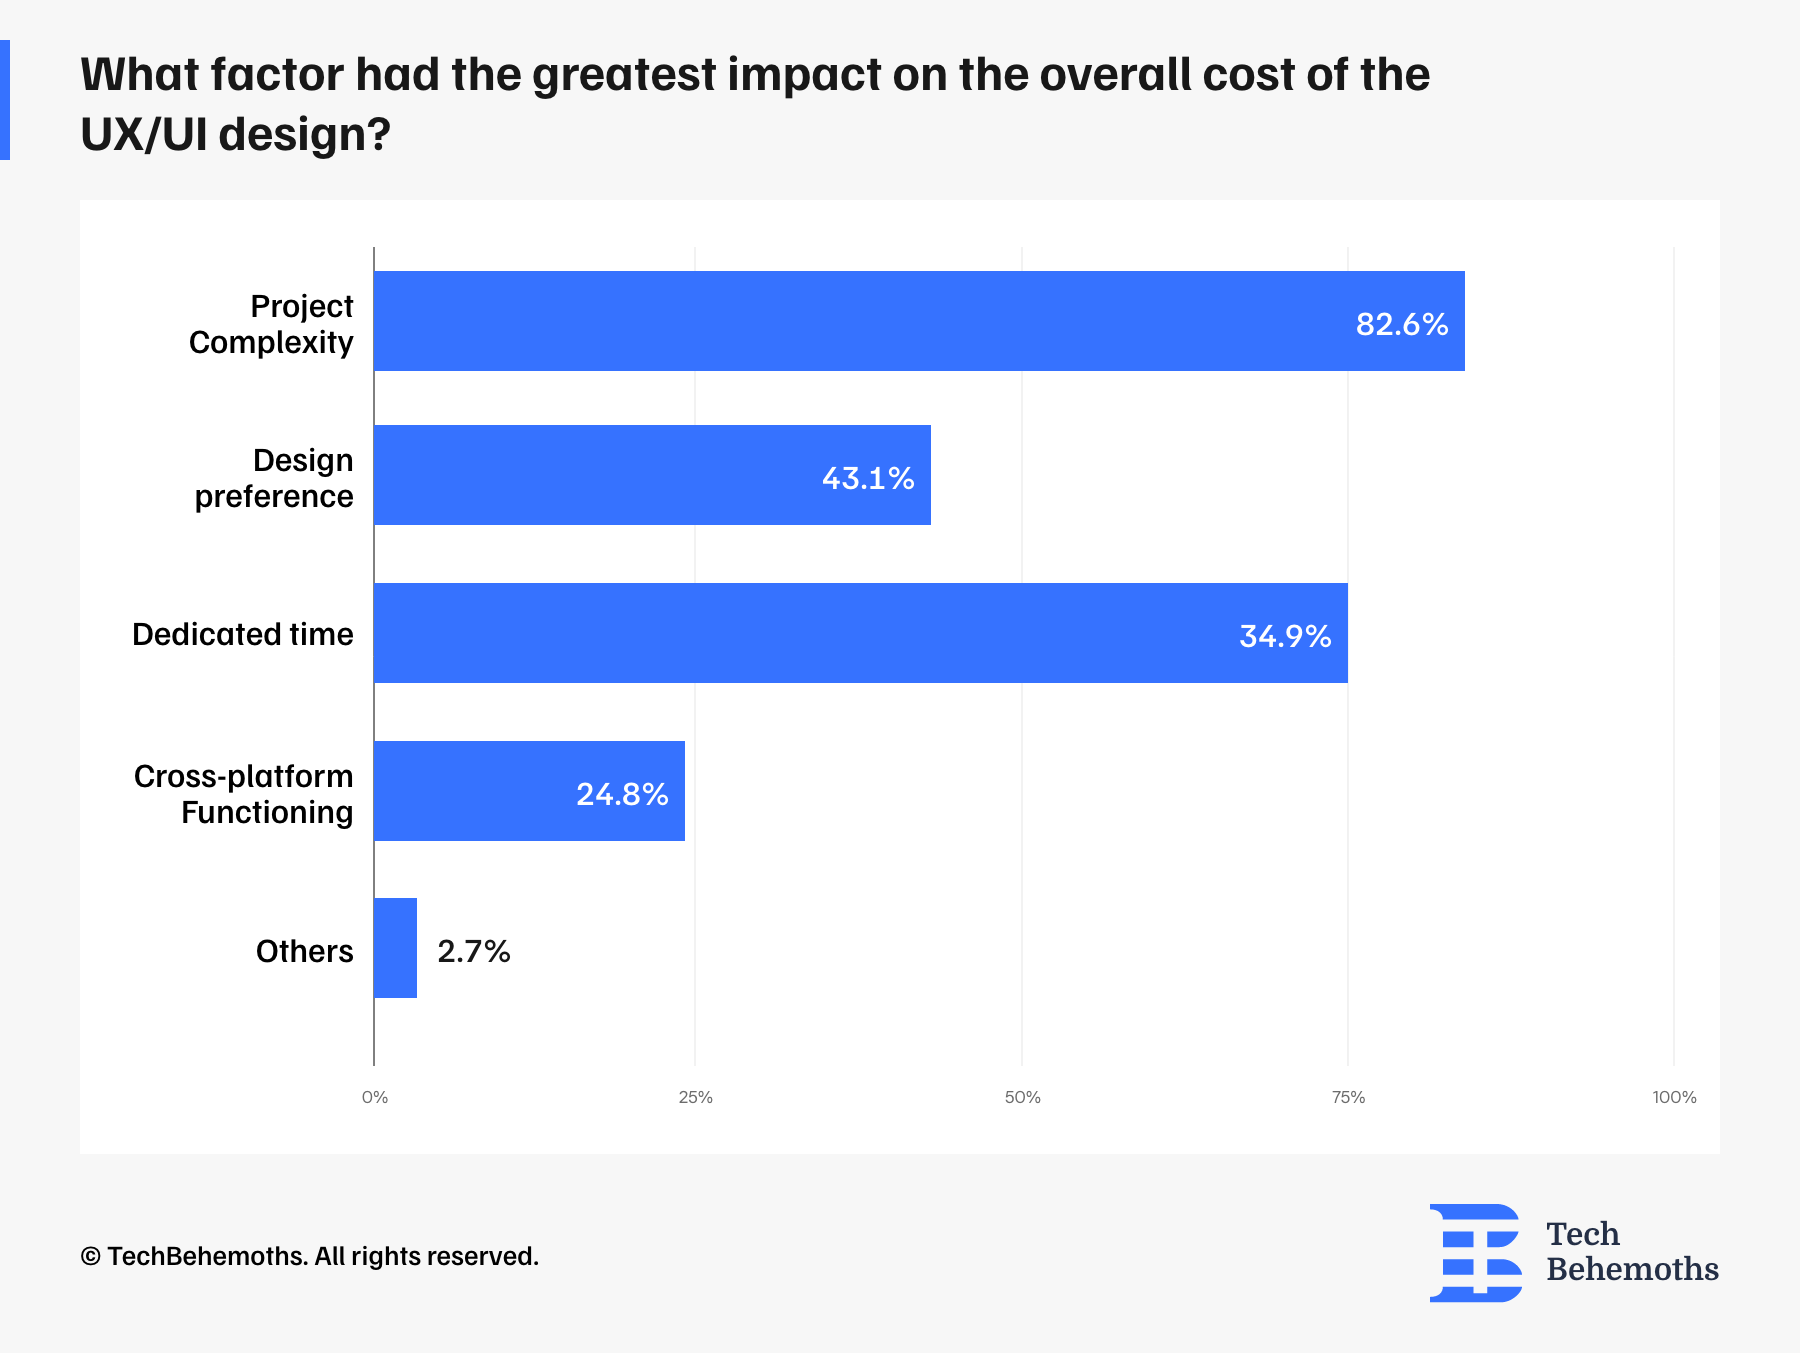 What factor had the greatest impact on the overall cost of the UX/UI design?